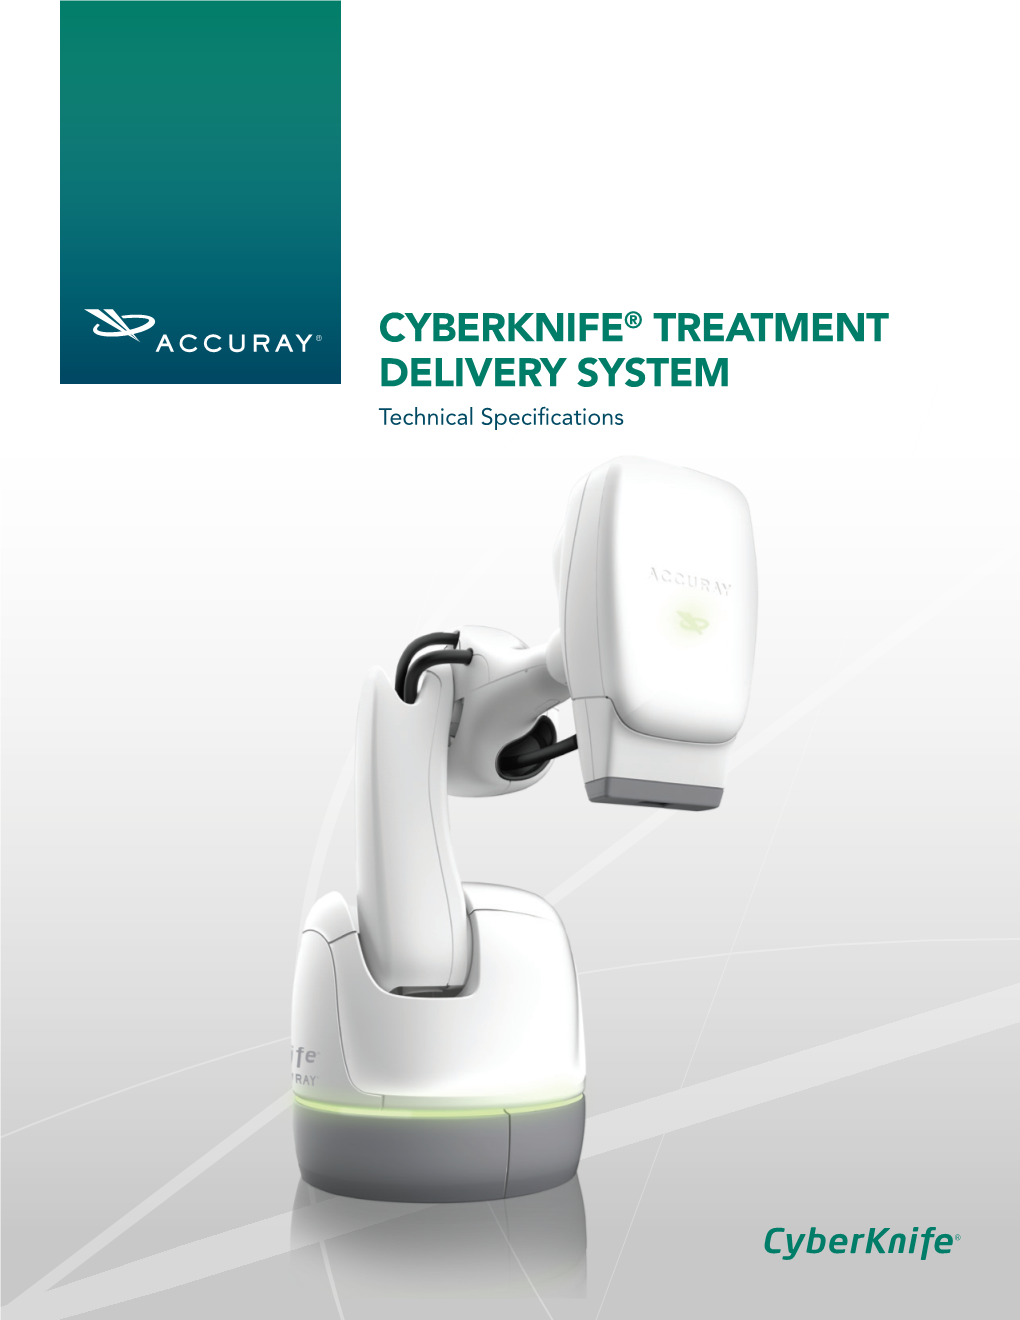 CYBERKNIFE® TREATMENT DELIVERY SYSTEM Technical Specifications the Cyberknife® Treatment Delivery System Offers a Comprehensive Toolkit of Clinical Features